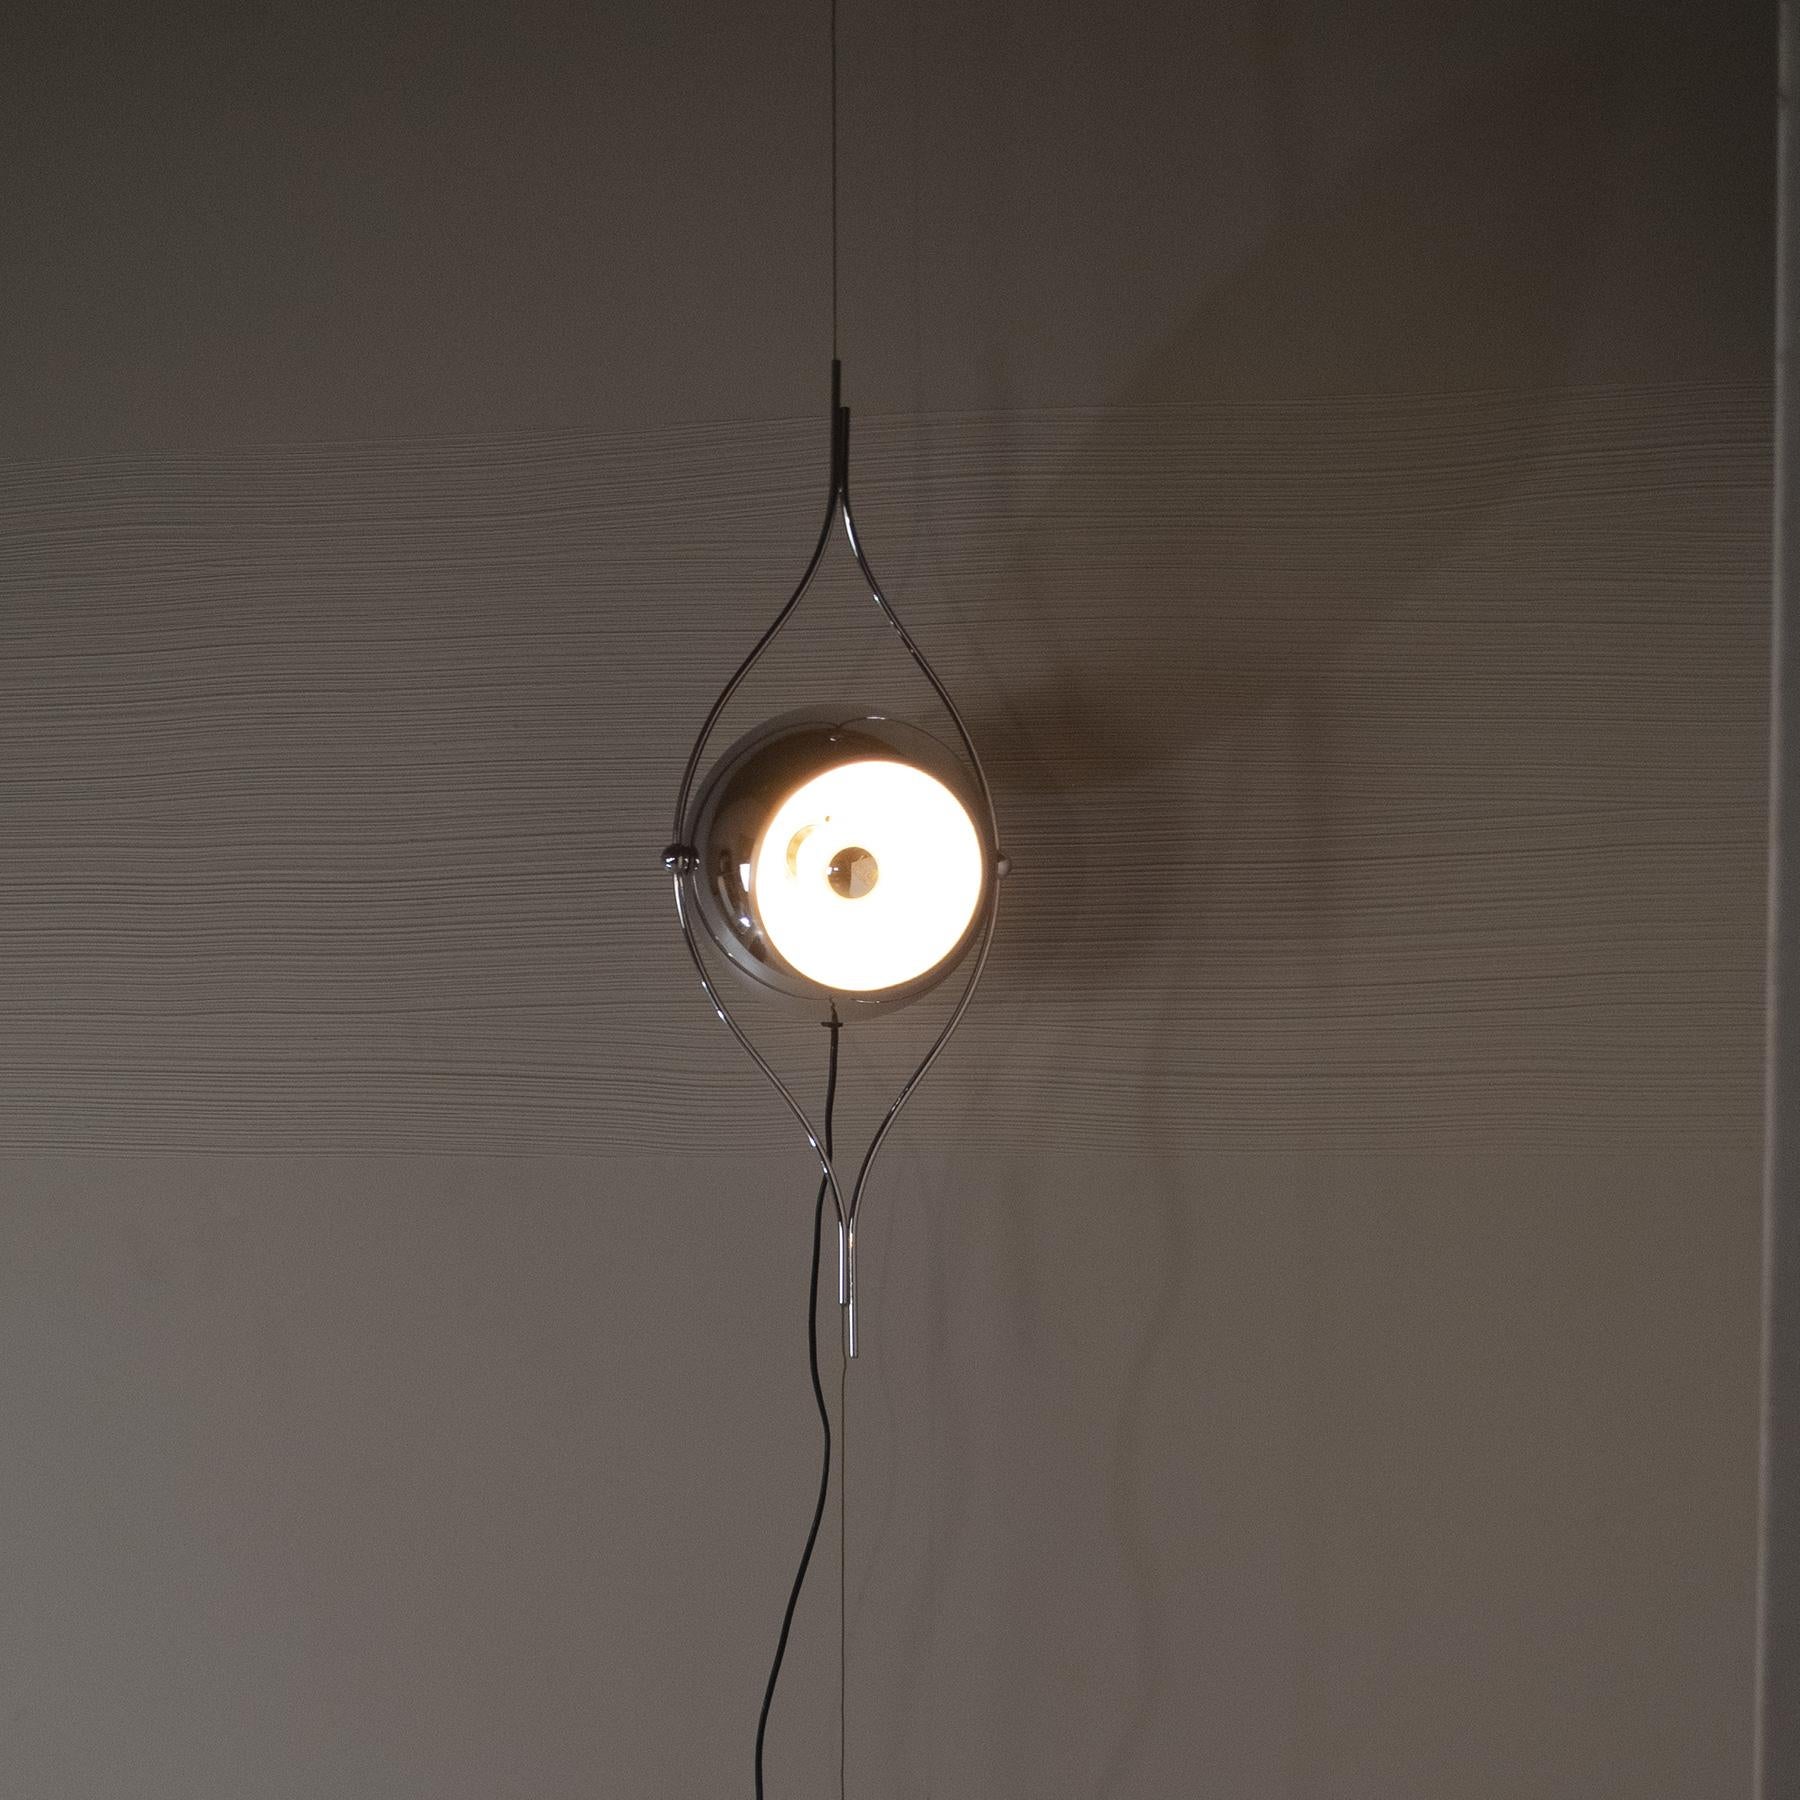 Suspension lamp composed of a steel lighting body with a steel counterweight as a terminal, produced by Goffredo Reggiani in the late 1960s.